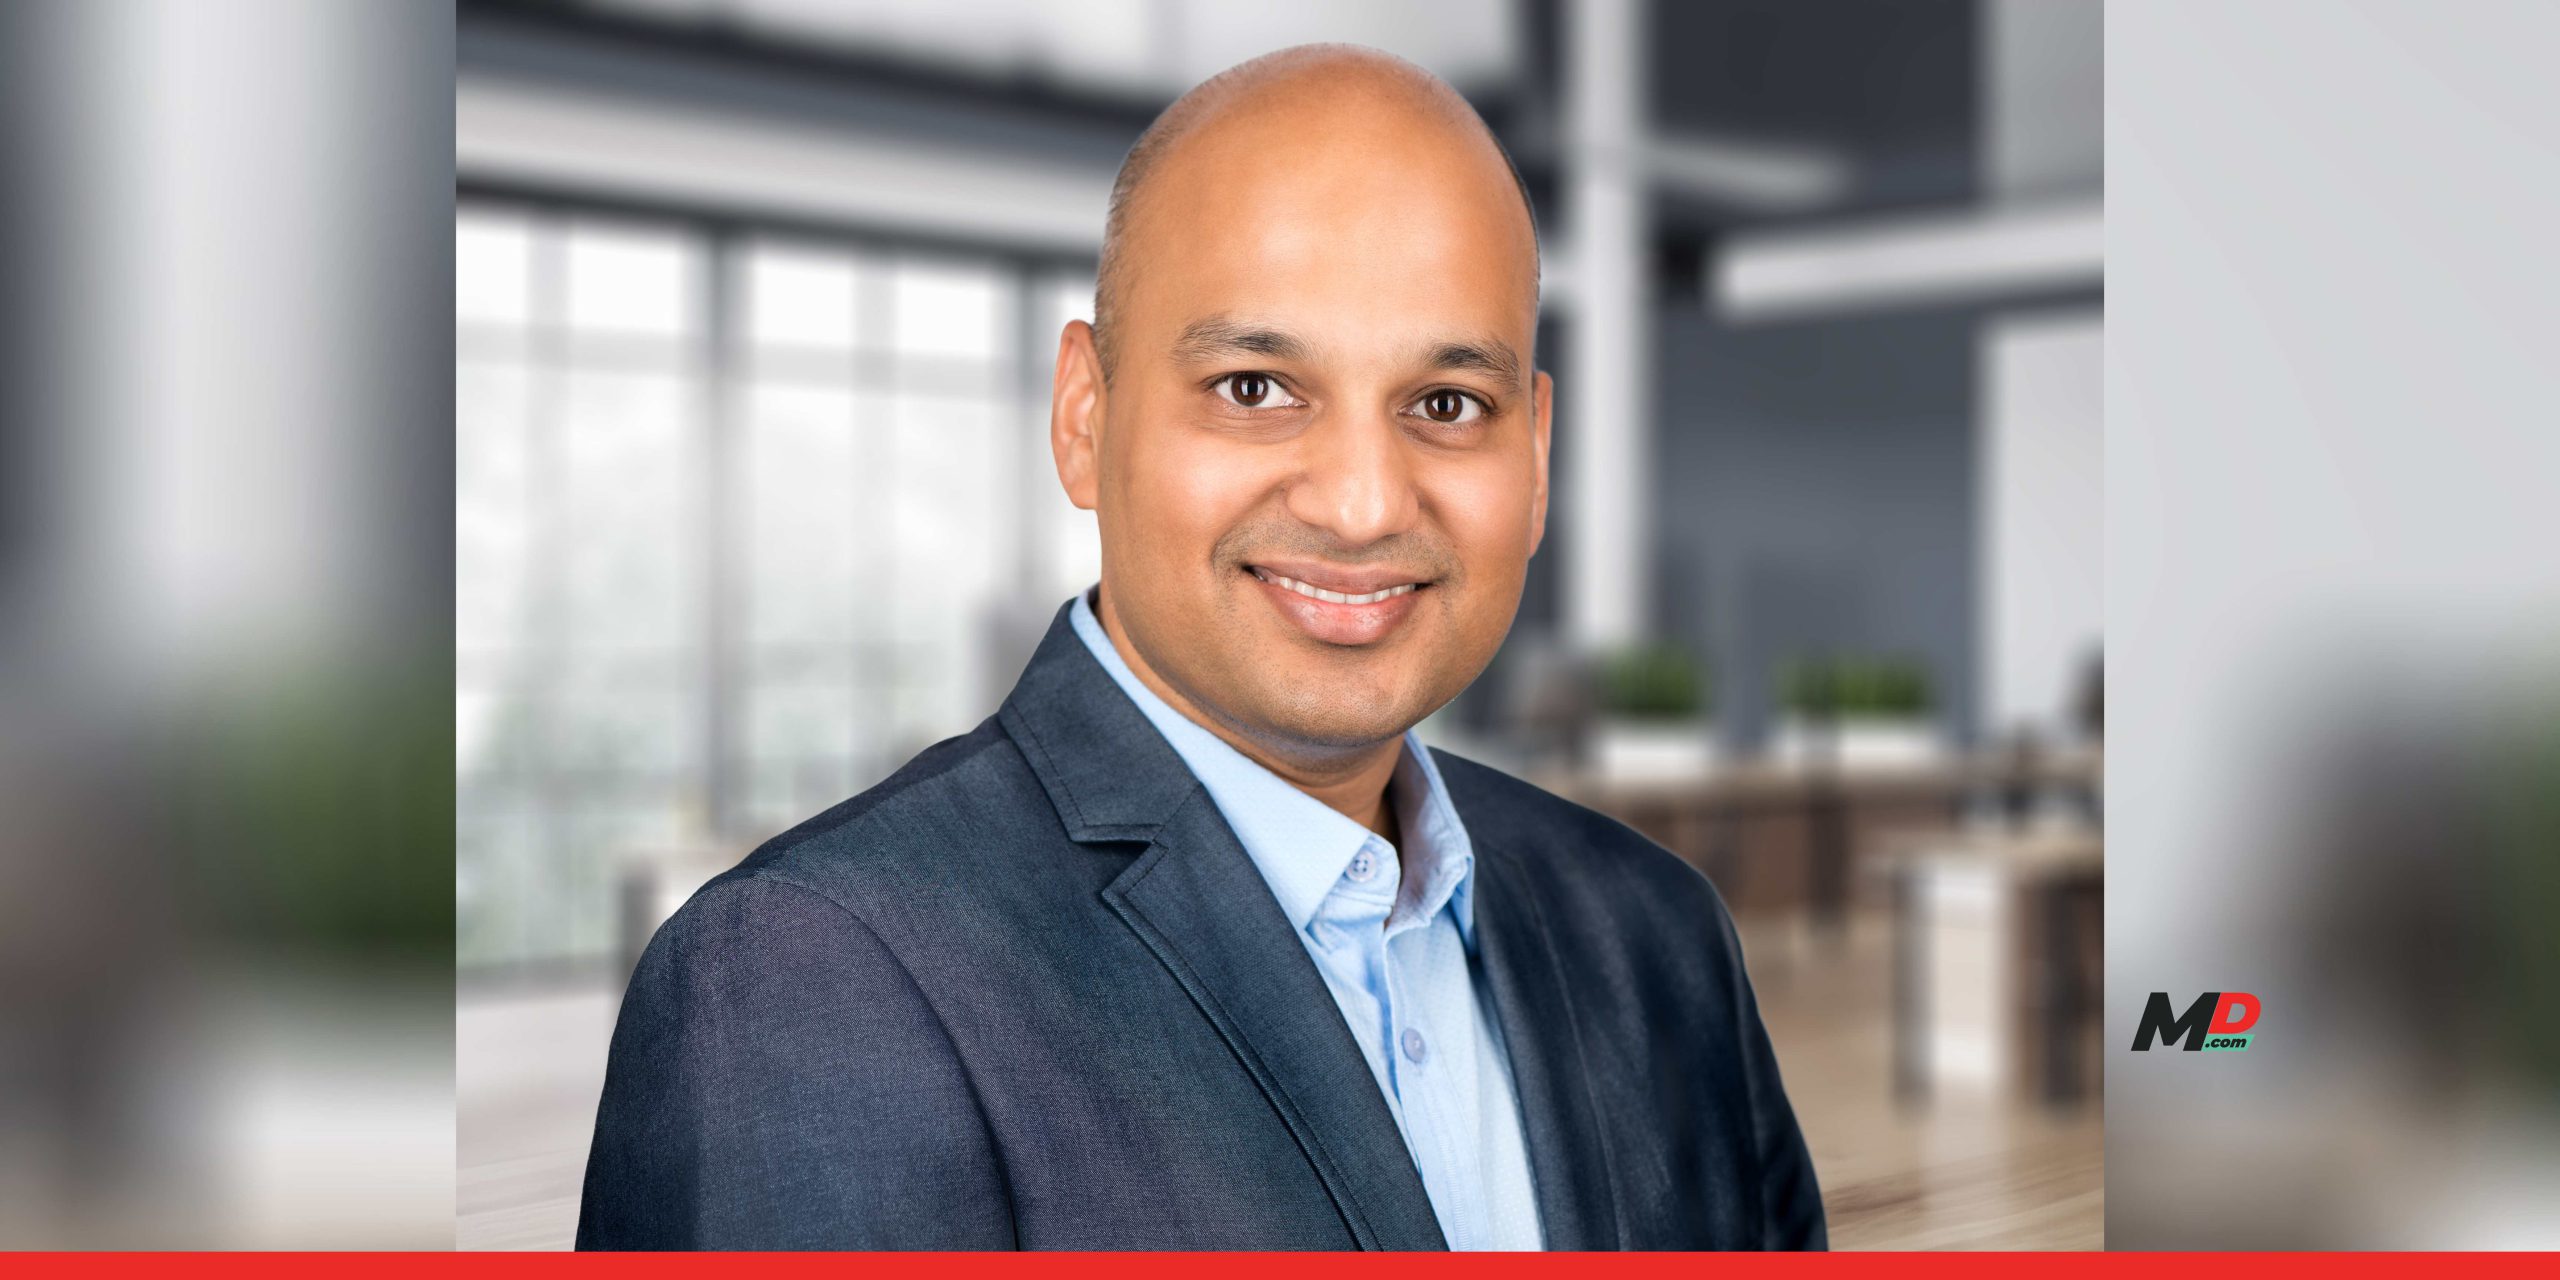 IBS Software Announces Appointment of New Chief Executive Officer Somit Goyal